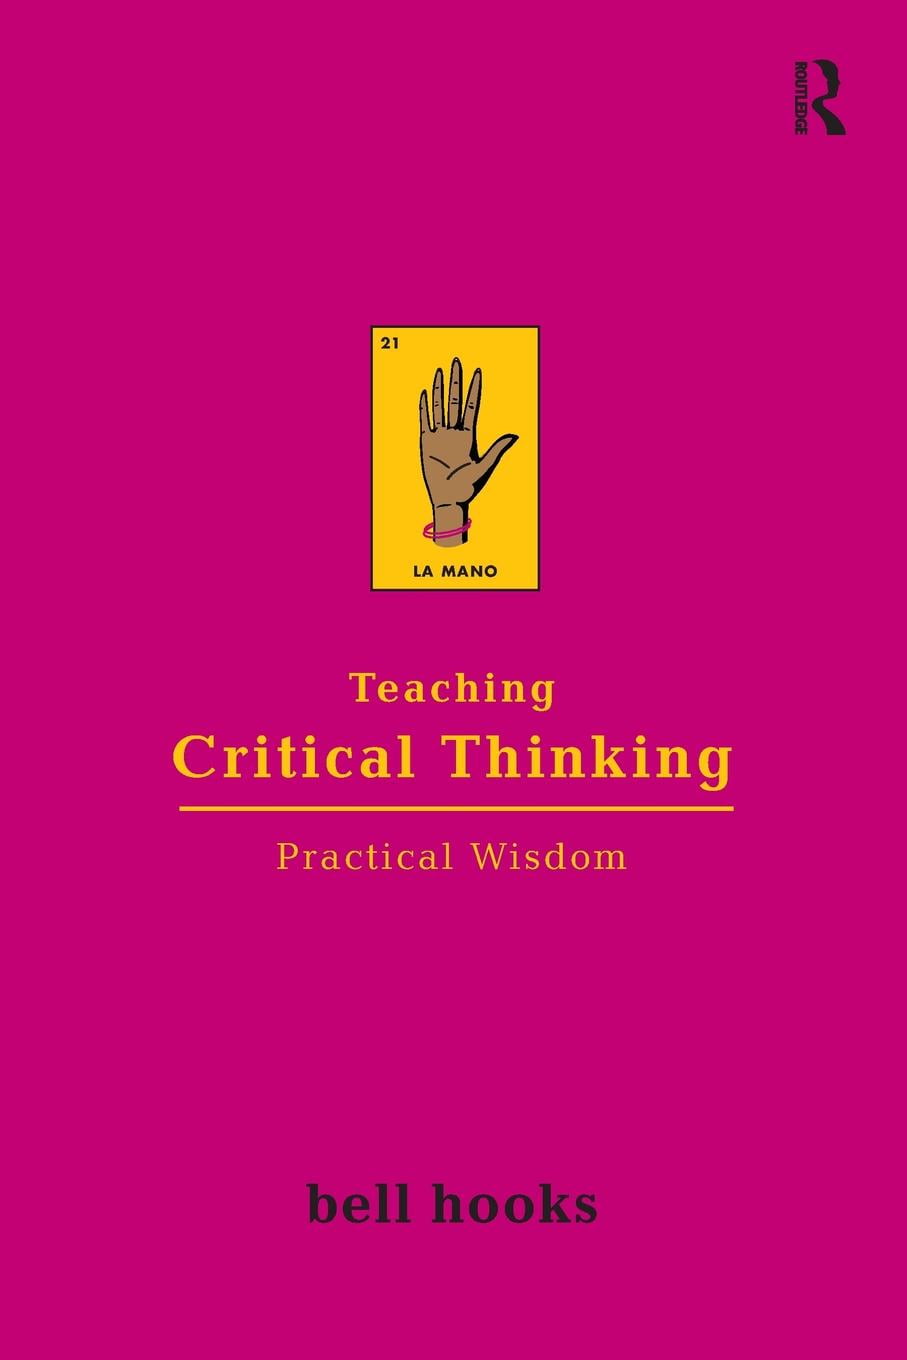 critical thinking by bell hooks